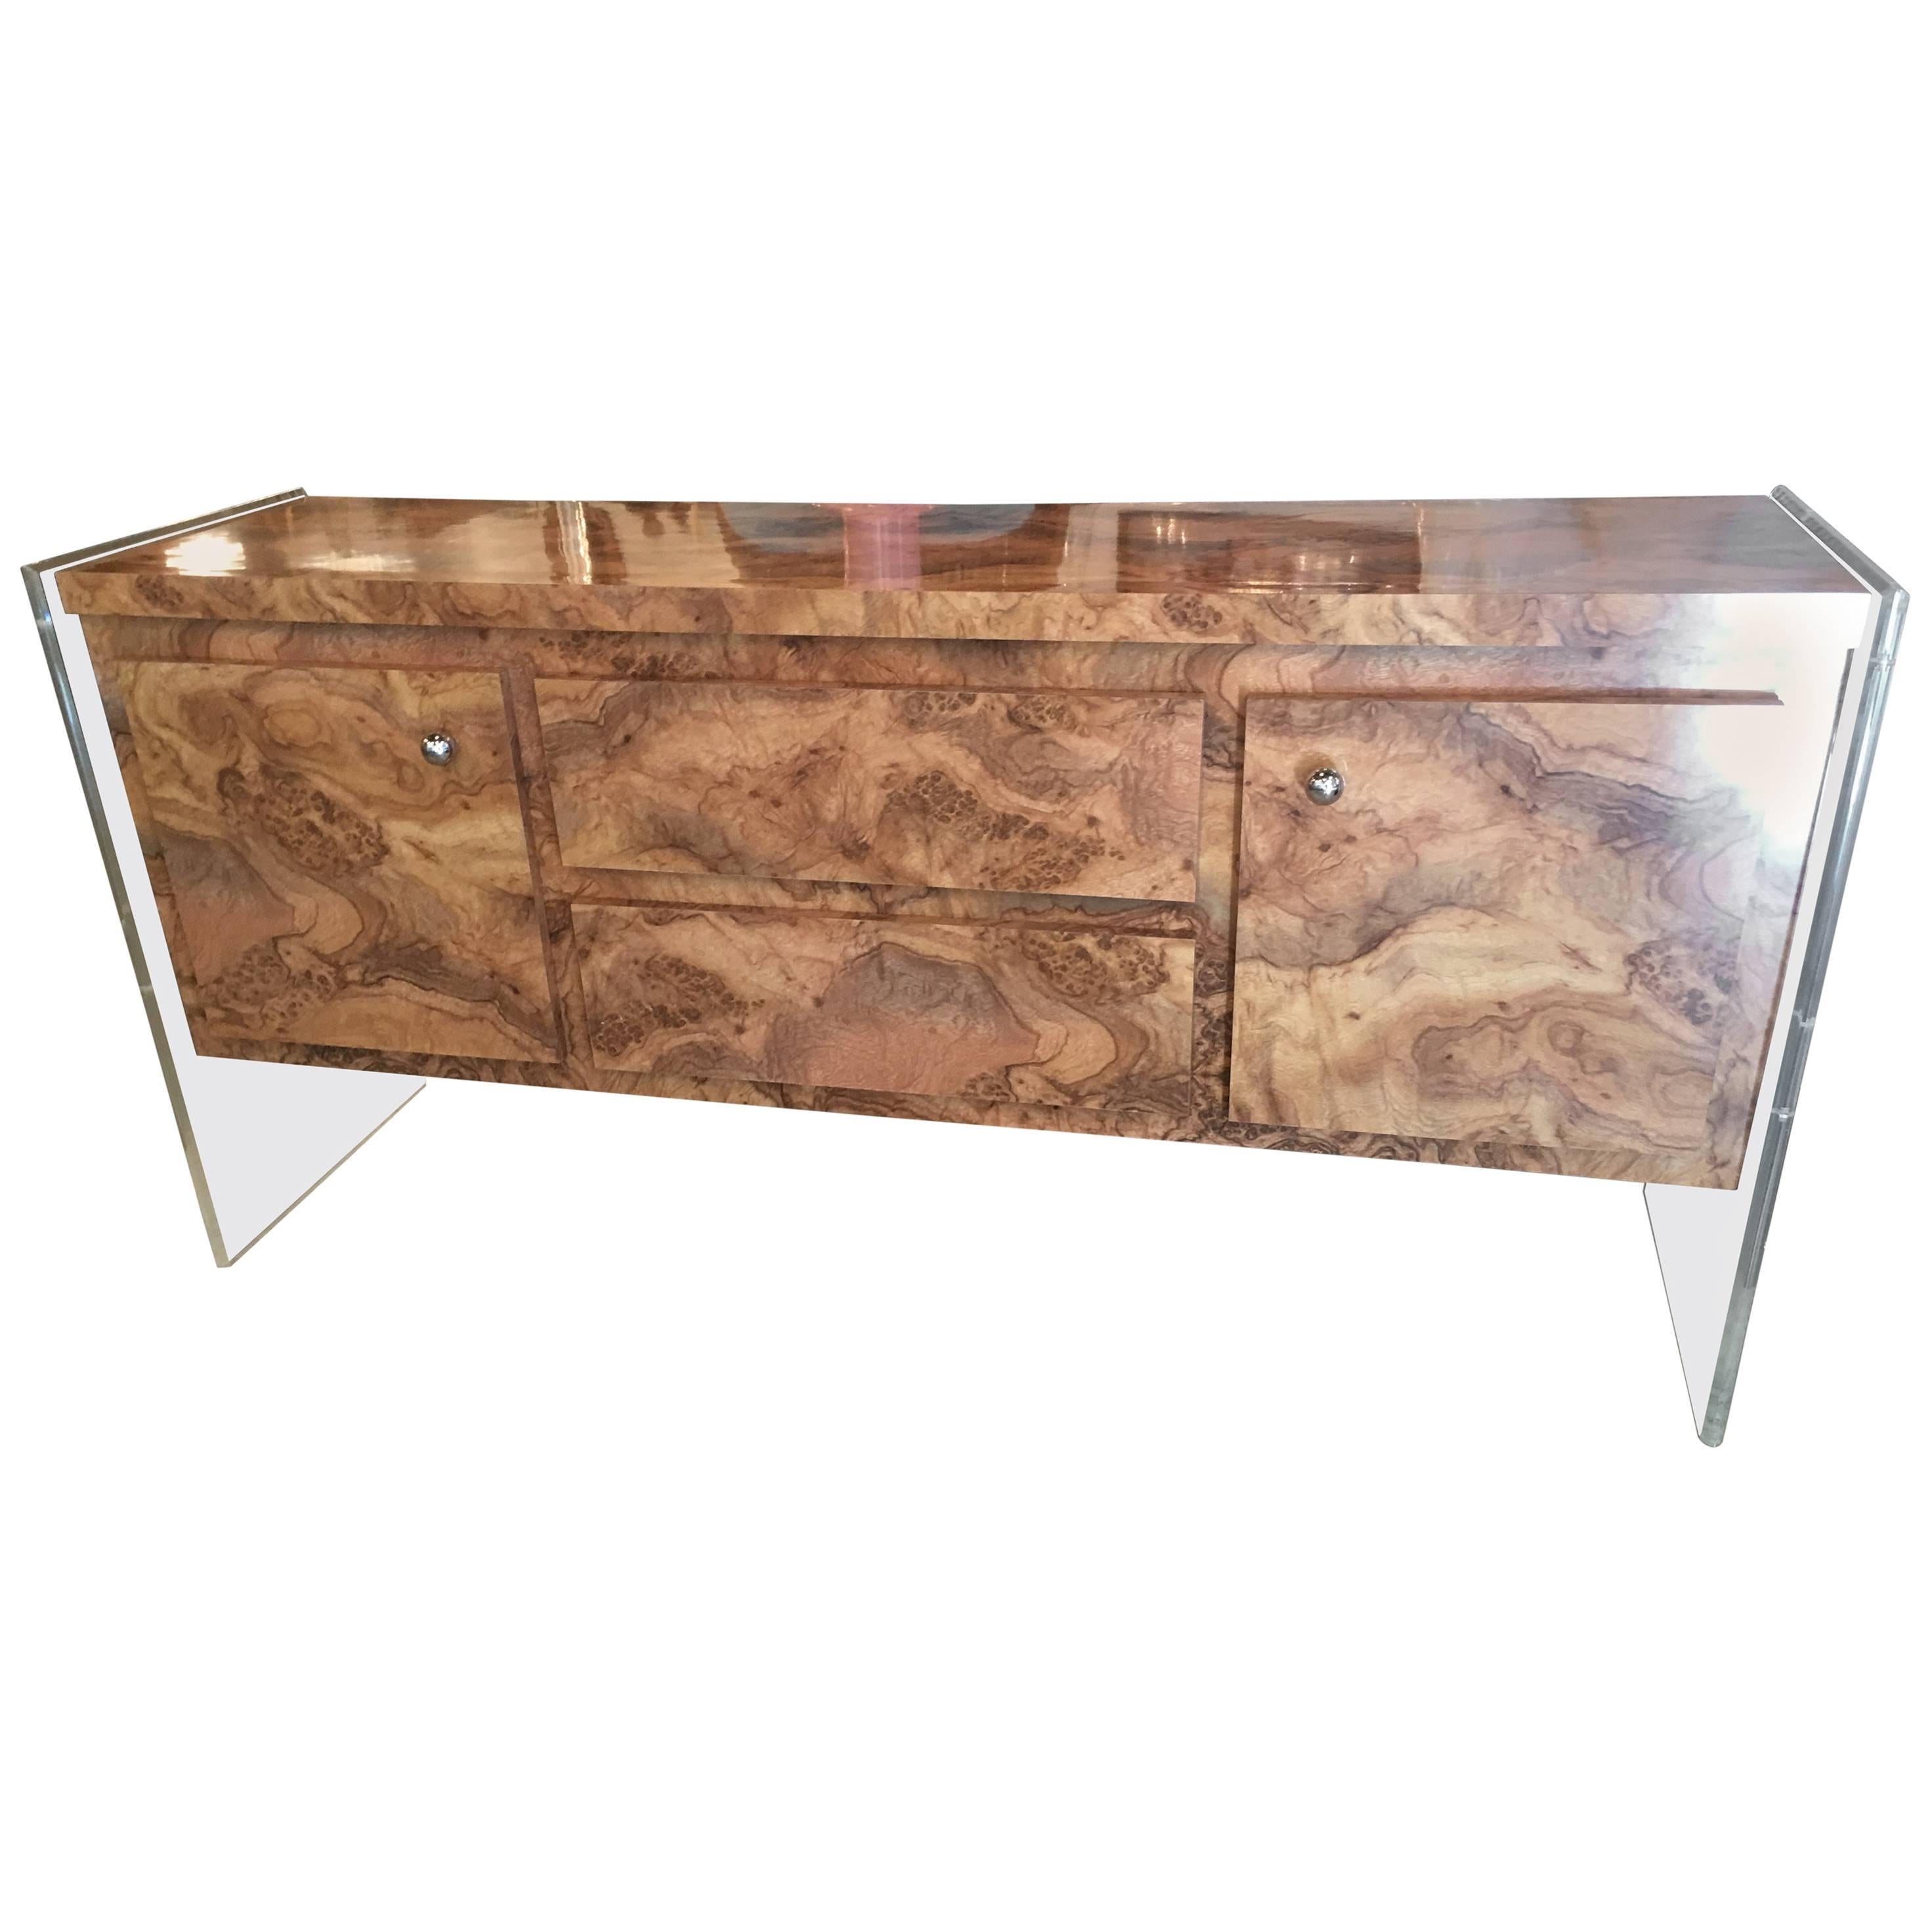 Faux Burl and Lucite Credenza Buffet Sideboard Dresser Chrome